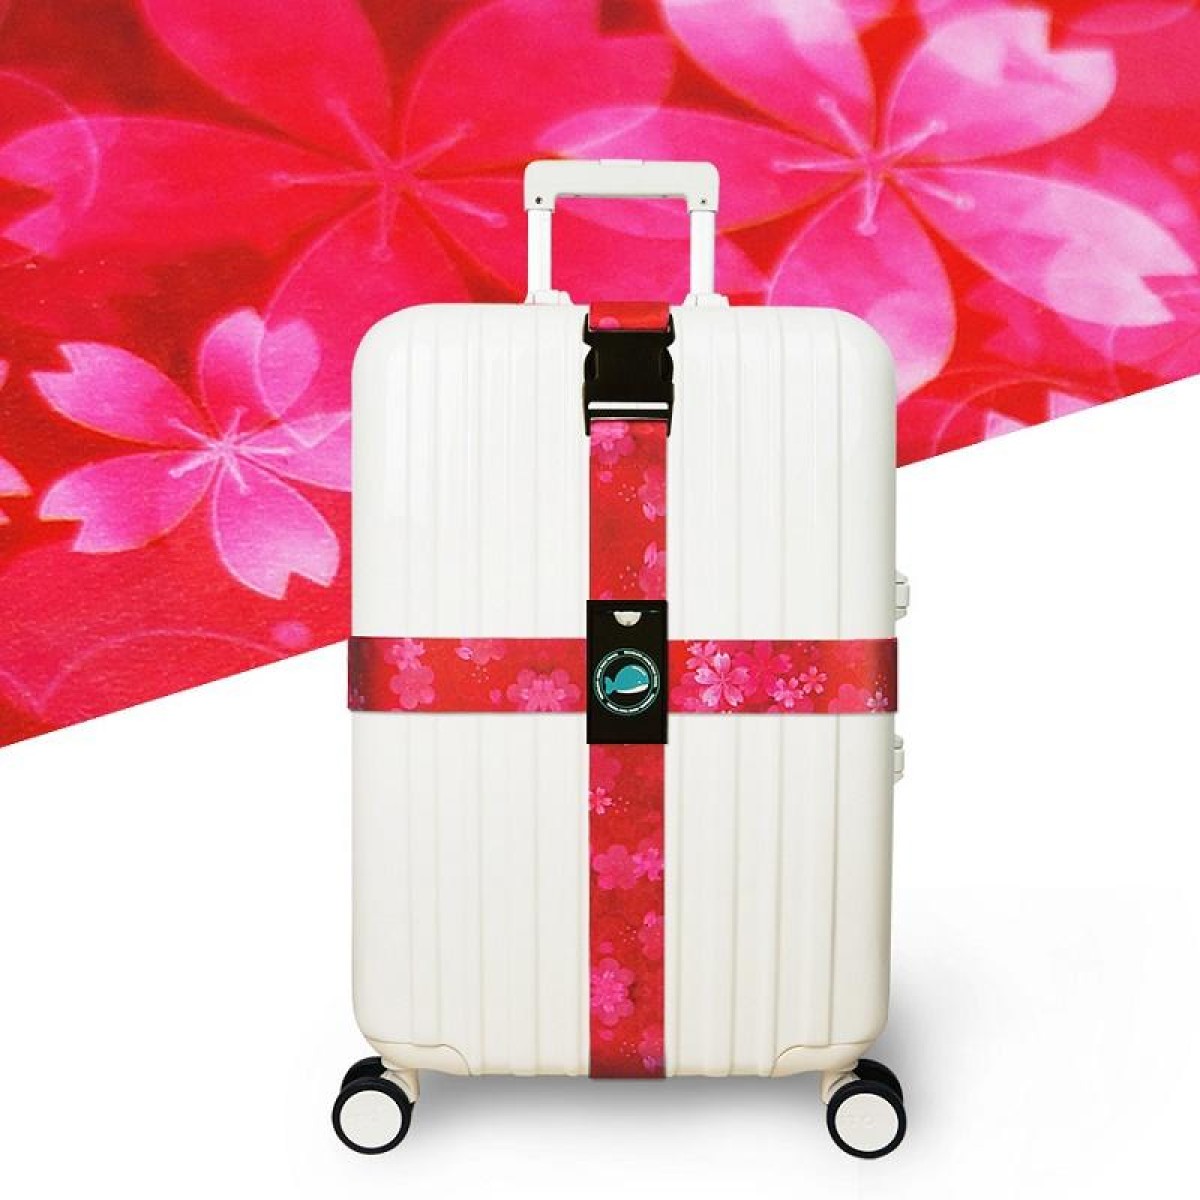 Cross Luggage Strap Without Combination Lock(Romantic Cherry Blossom)